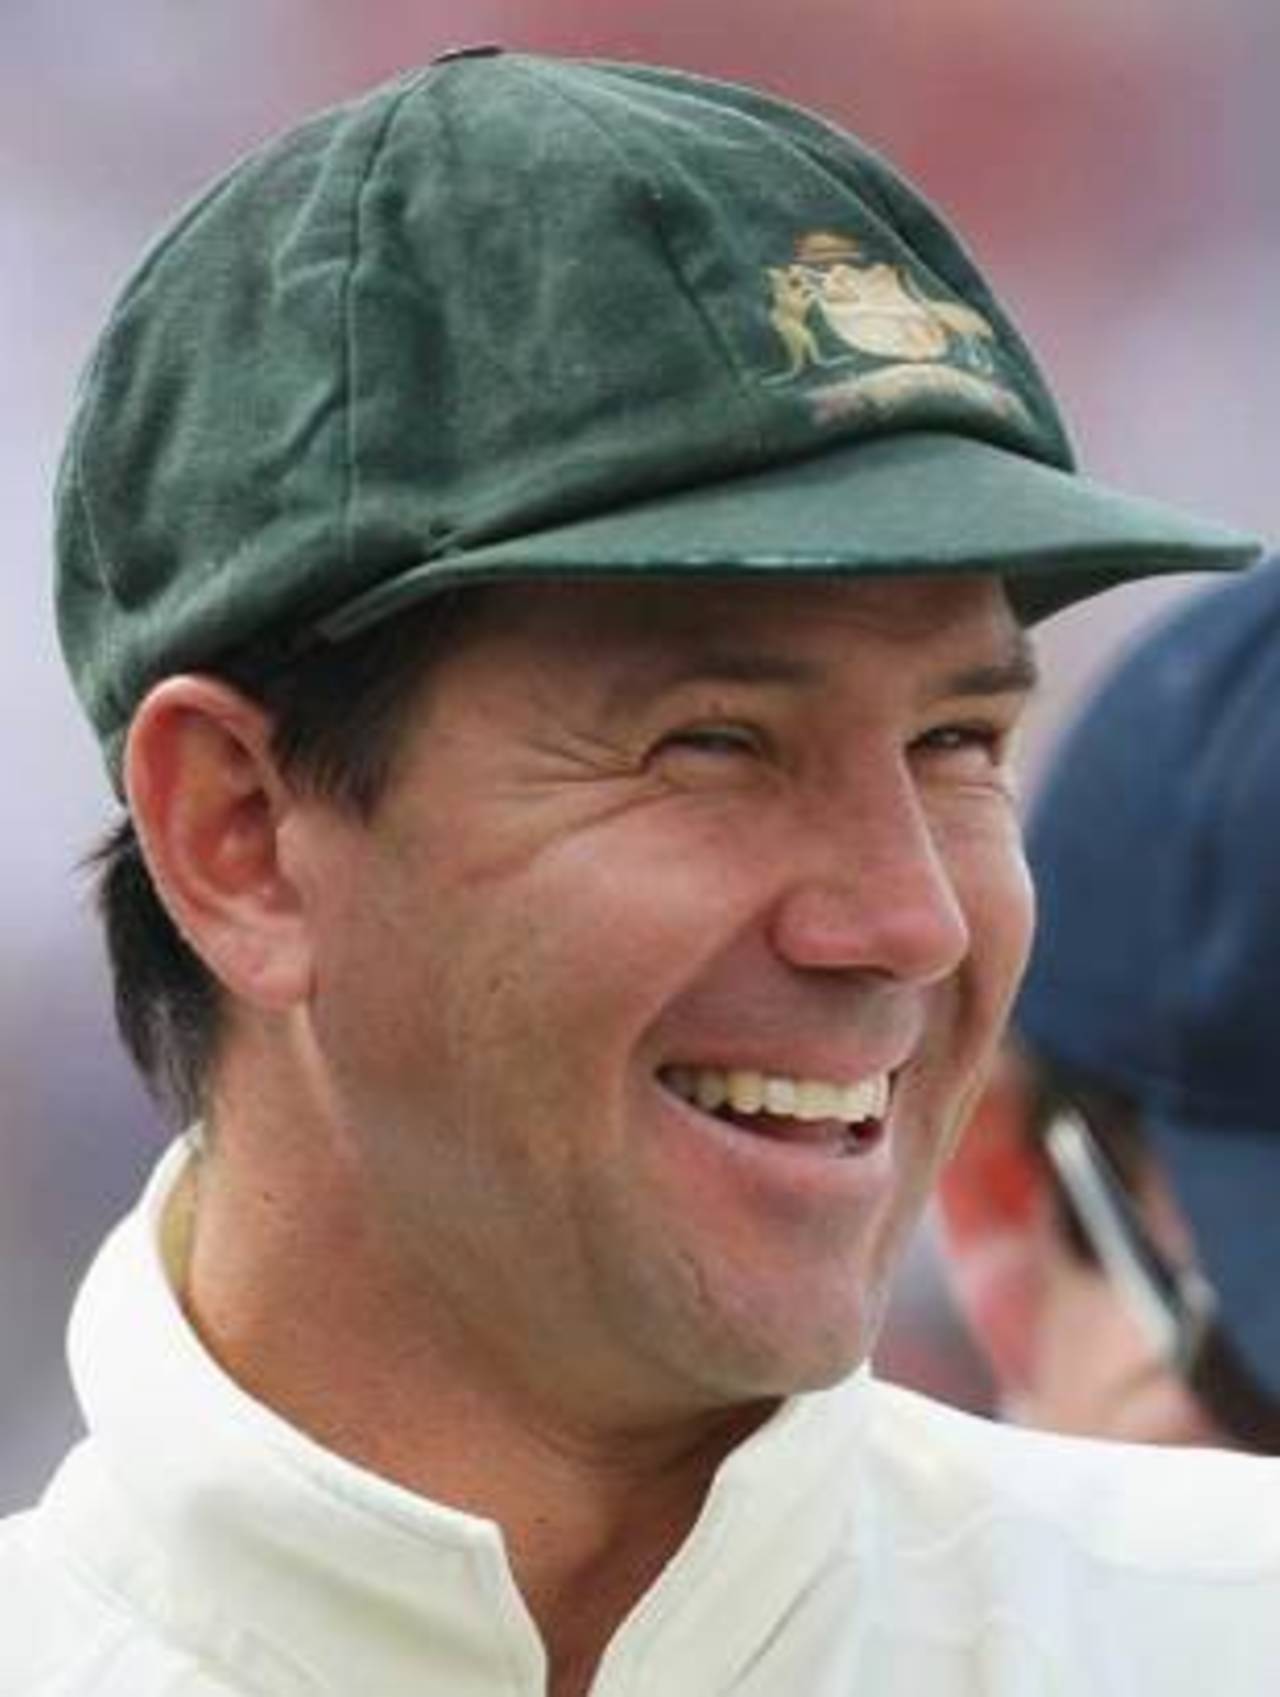 Ricky Ponting: 'It's a chance I've been waiting for this whole tour and a chance the whole team has been waiting for'&nbsp;&nbsp;&bull;&nbsp;&nbsp;Getty Images